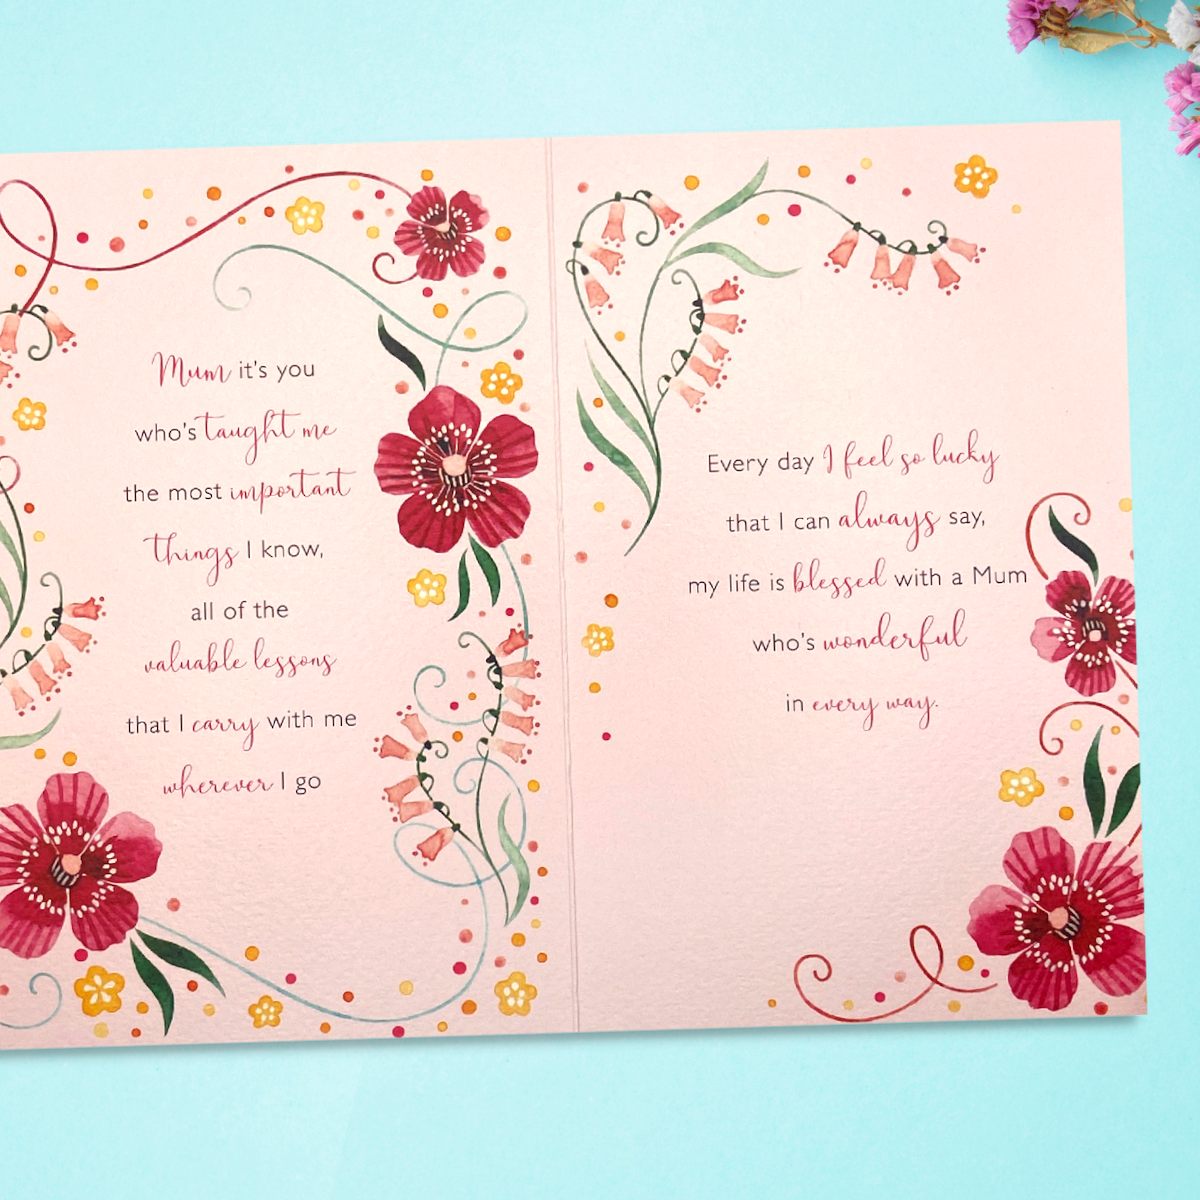 Two further pages with more verse and flower graphics